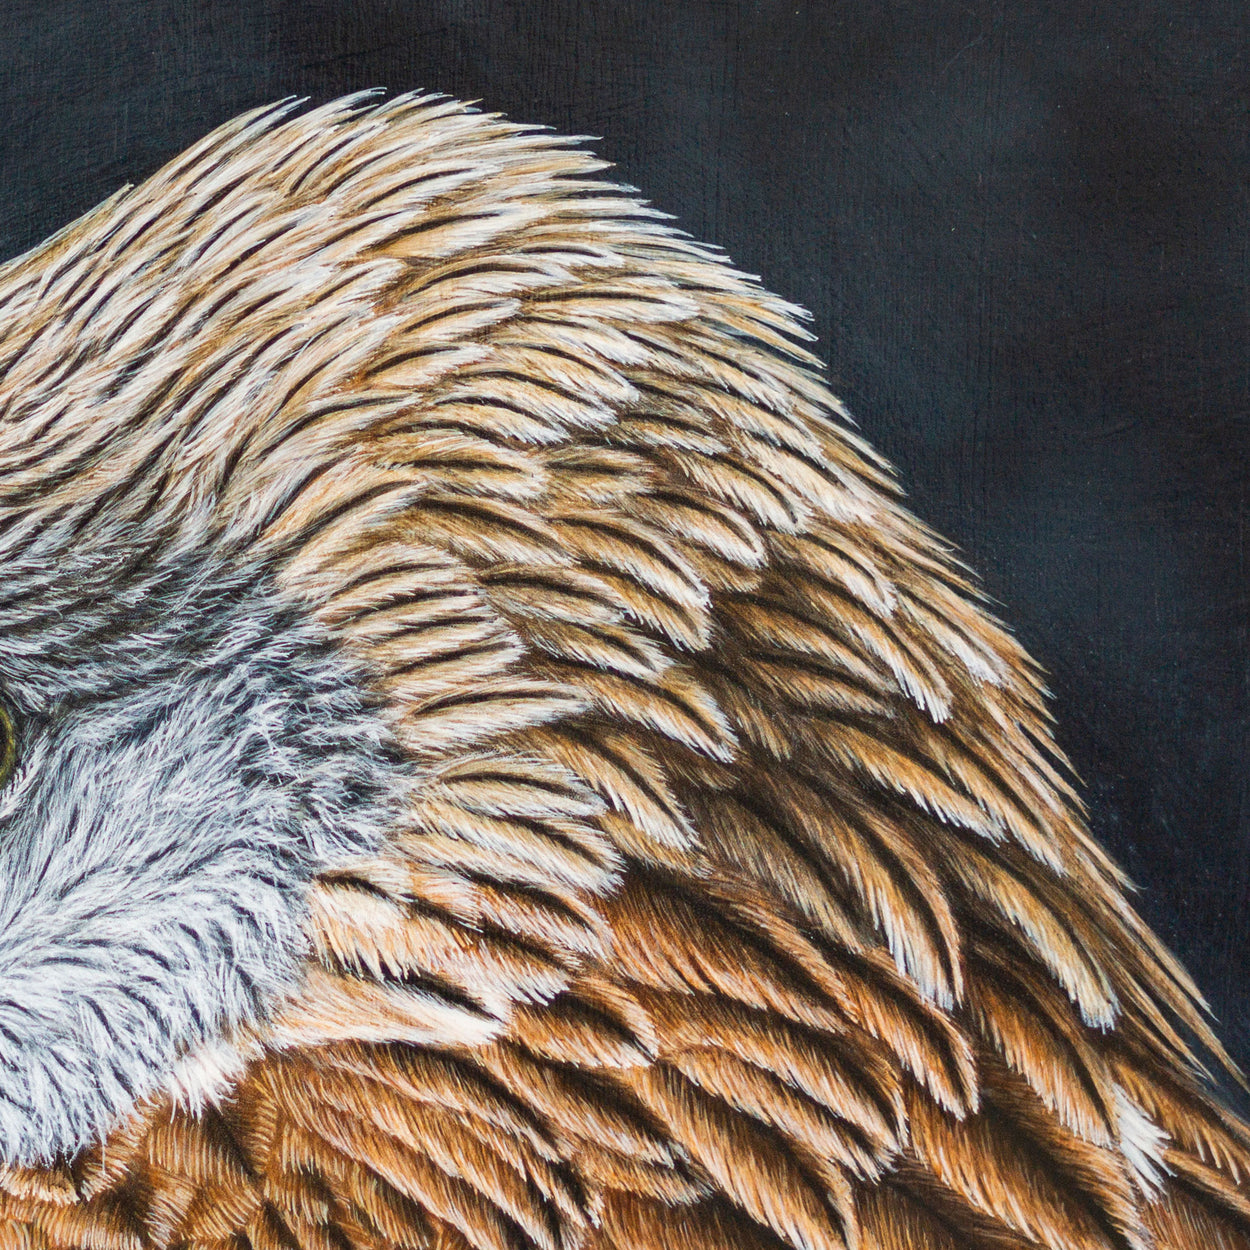 Red Kite Portrait Painting Close-up 3 - Jill Dimond